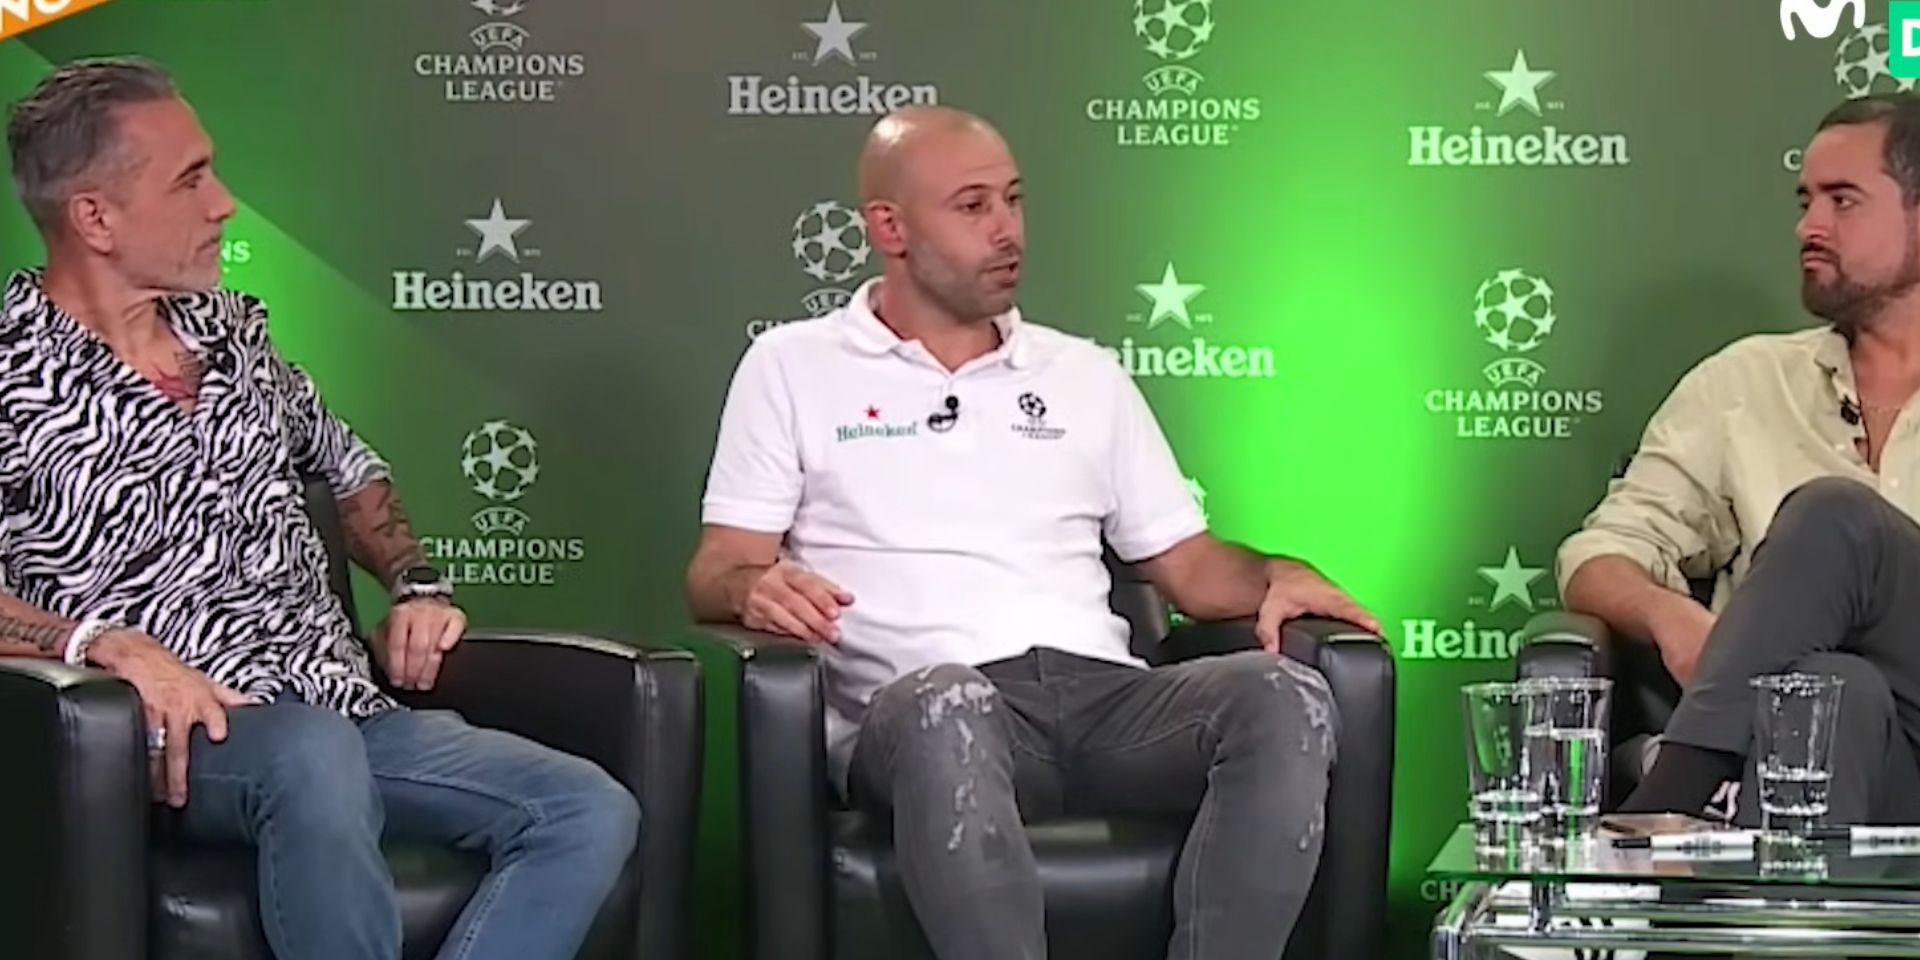 (Video) “I made a great decision”: Mascherano reflects on Liverpool transfer and Benitez’s pebble talk